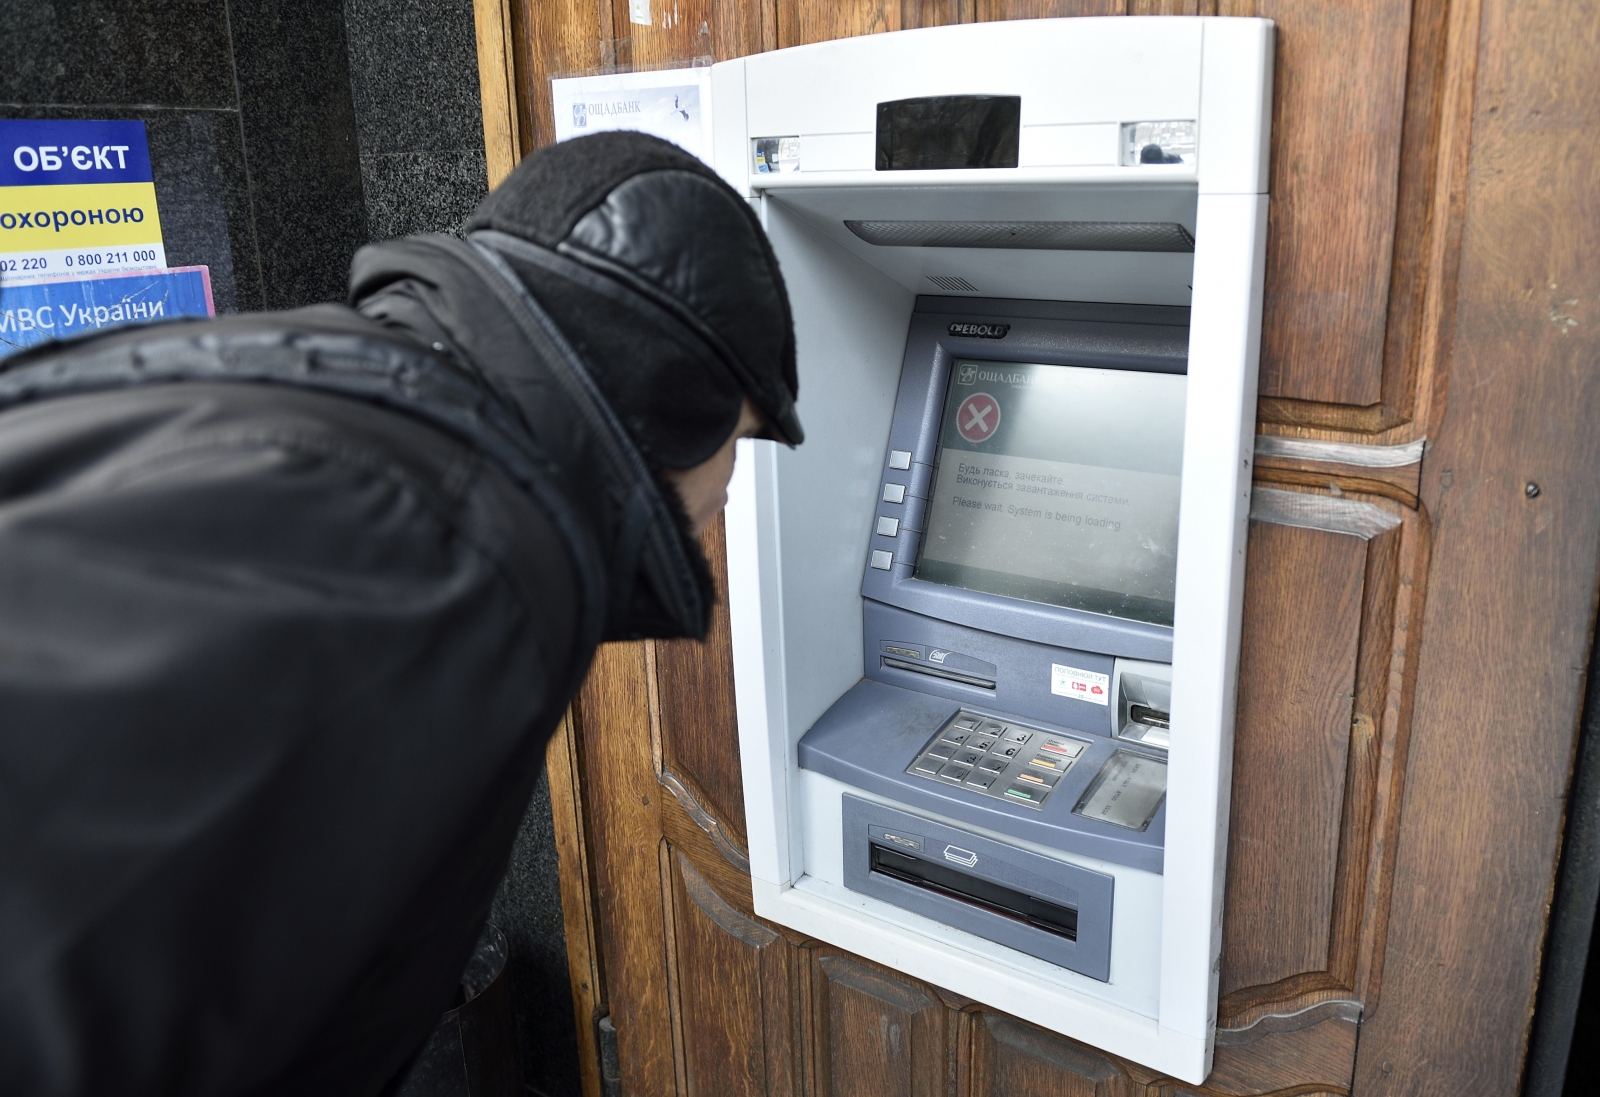 A man stands in front an ATM machine which is out of order, on November 26, 2014 in the eastern Ukrainian city of Donetsk